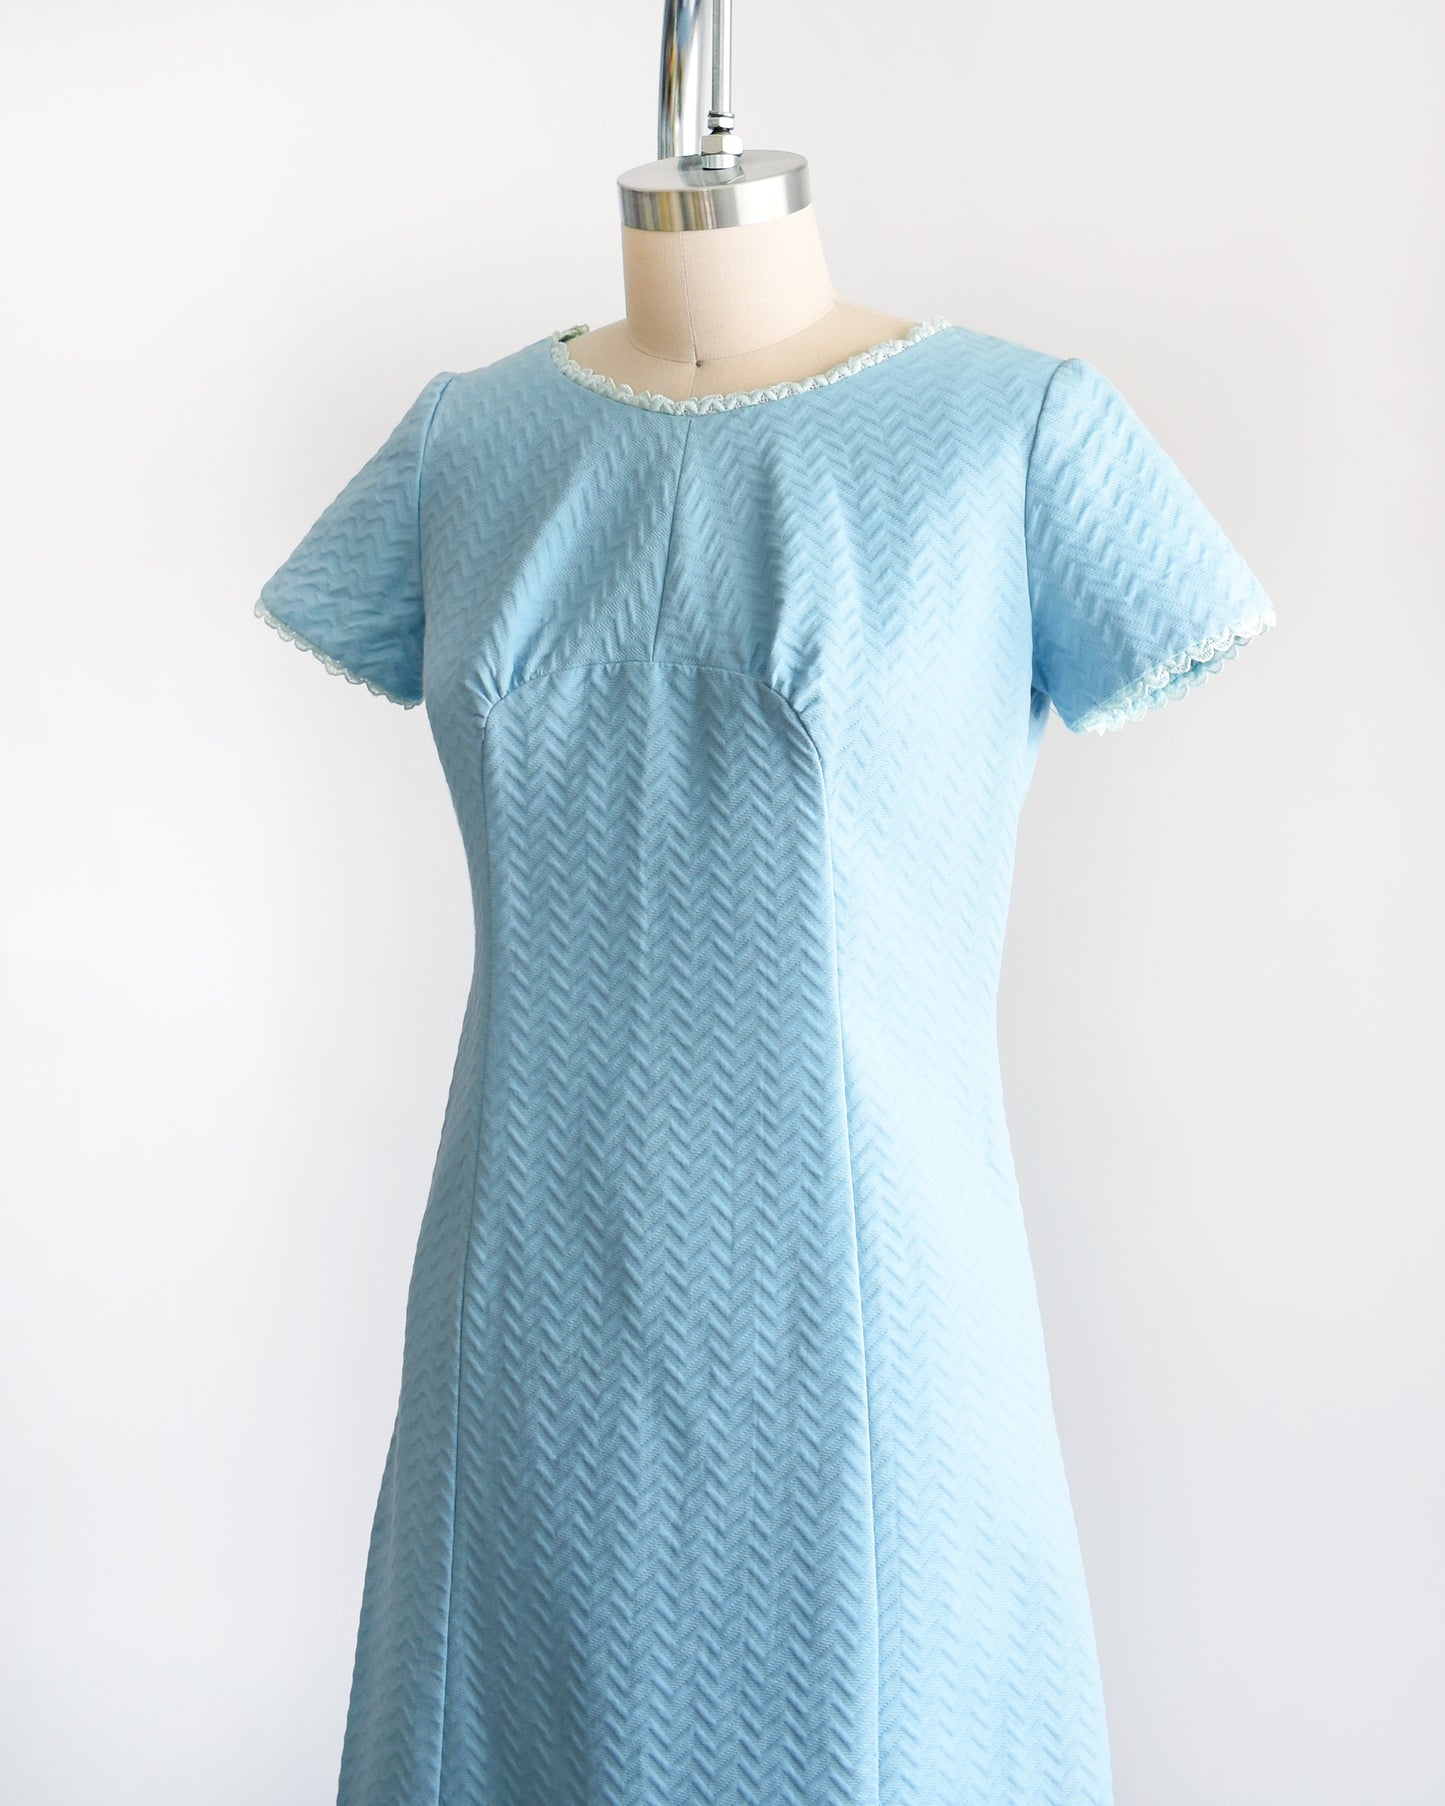 Side front view of a A vintage 1960s mod dress that has textured light blue chevron striped knit with alternating ribbing and lace trim.